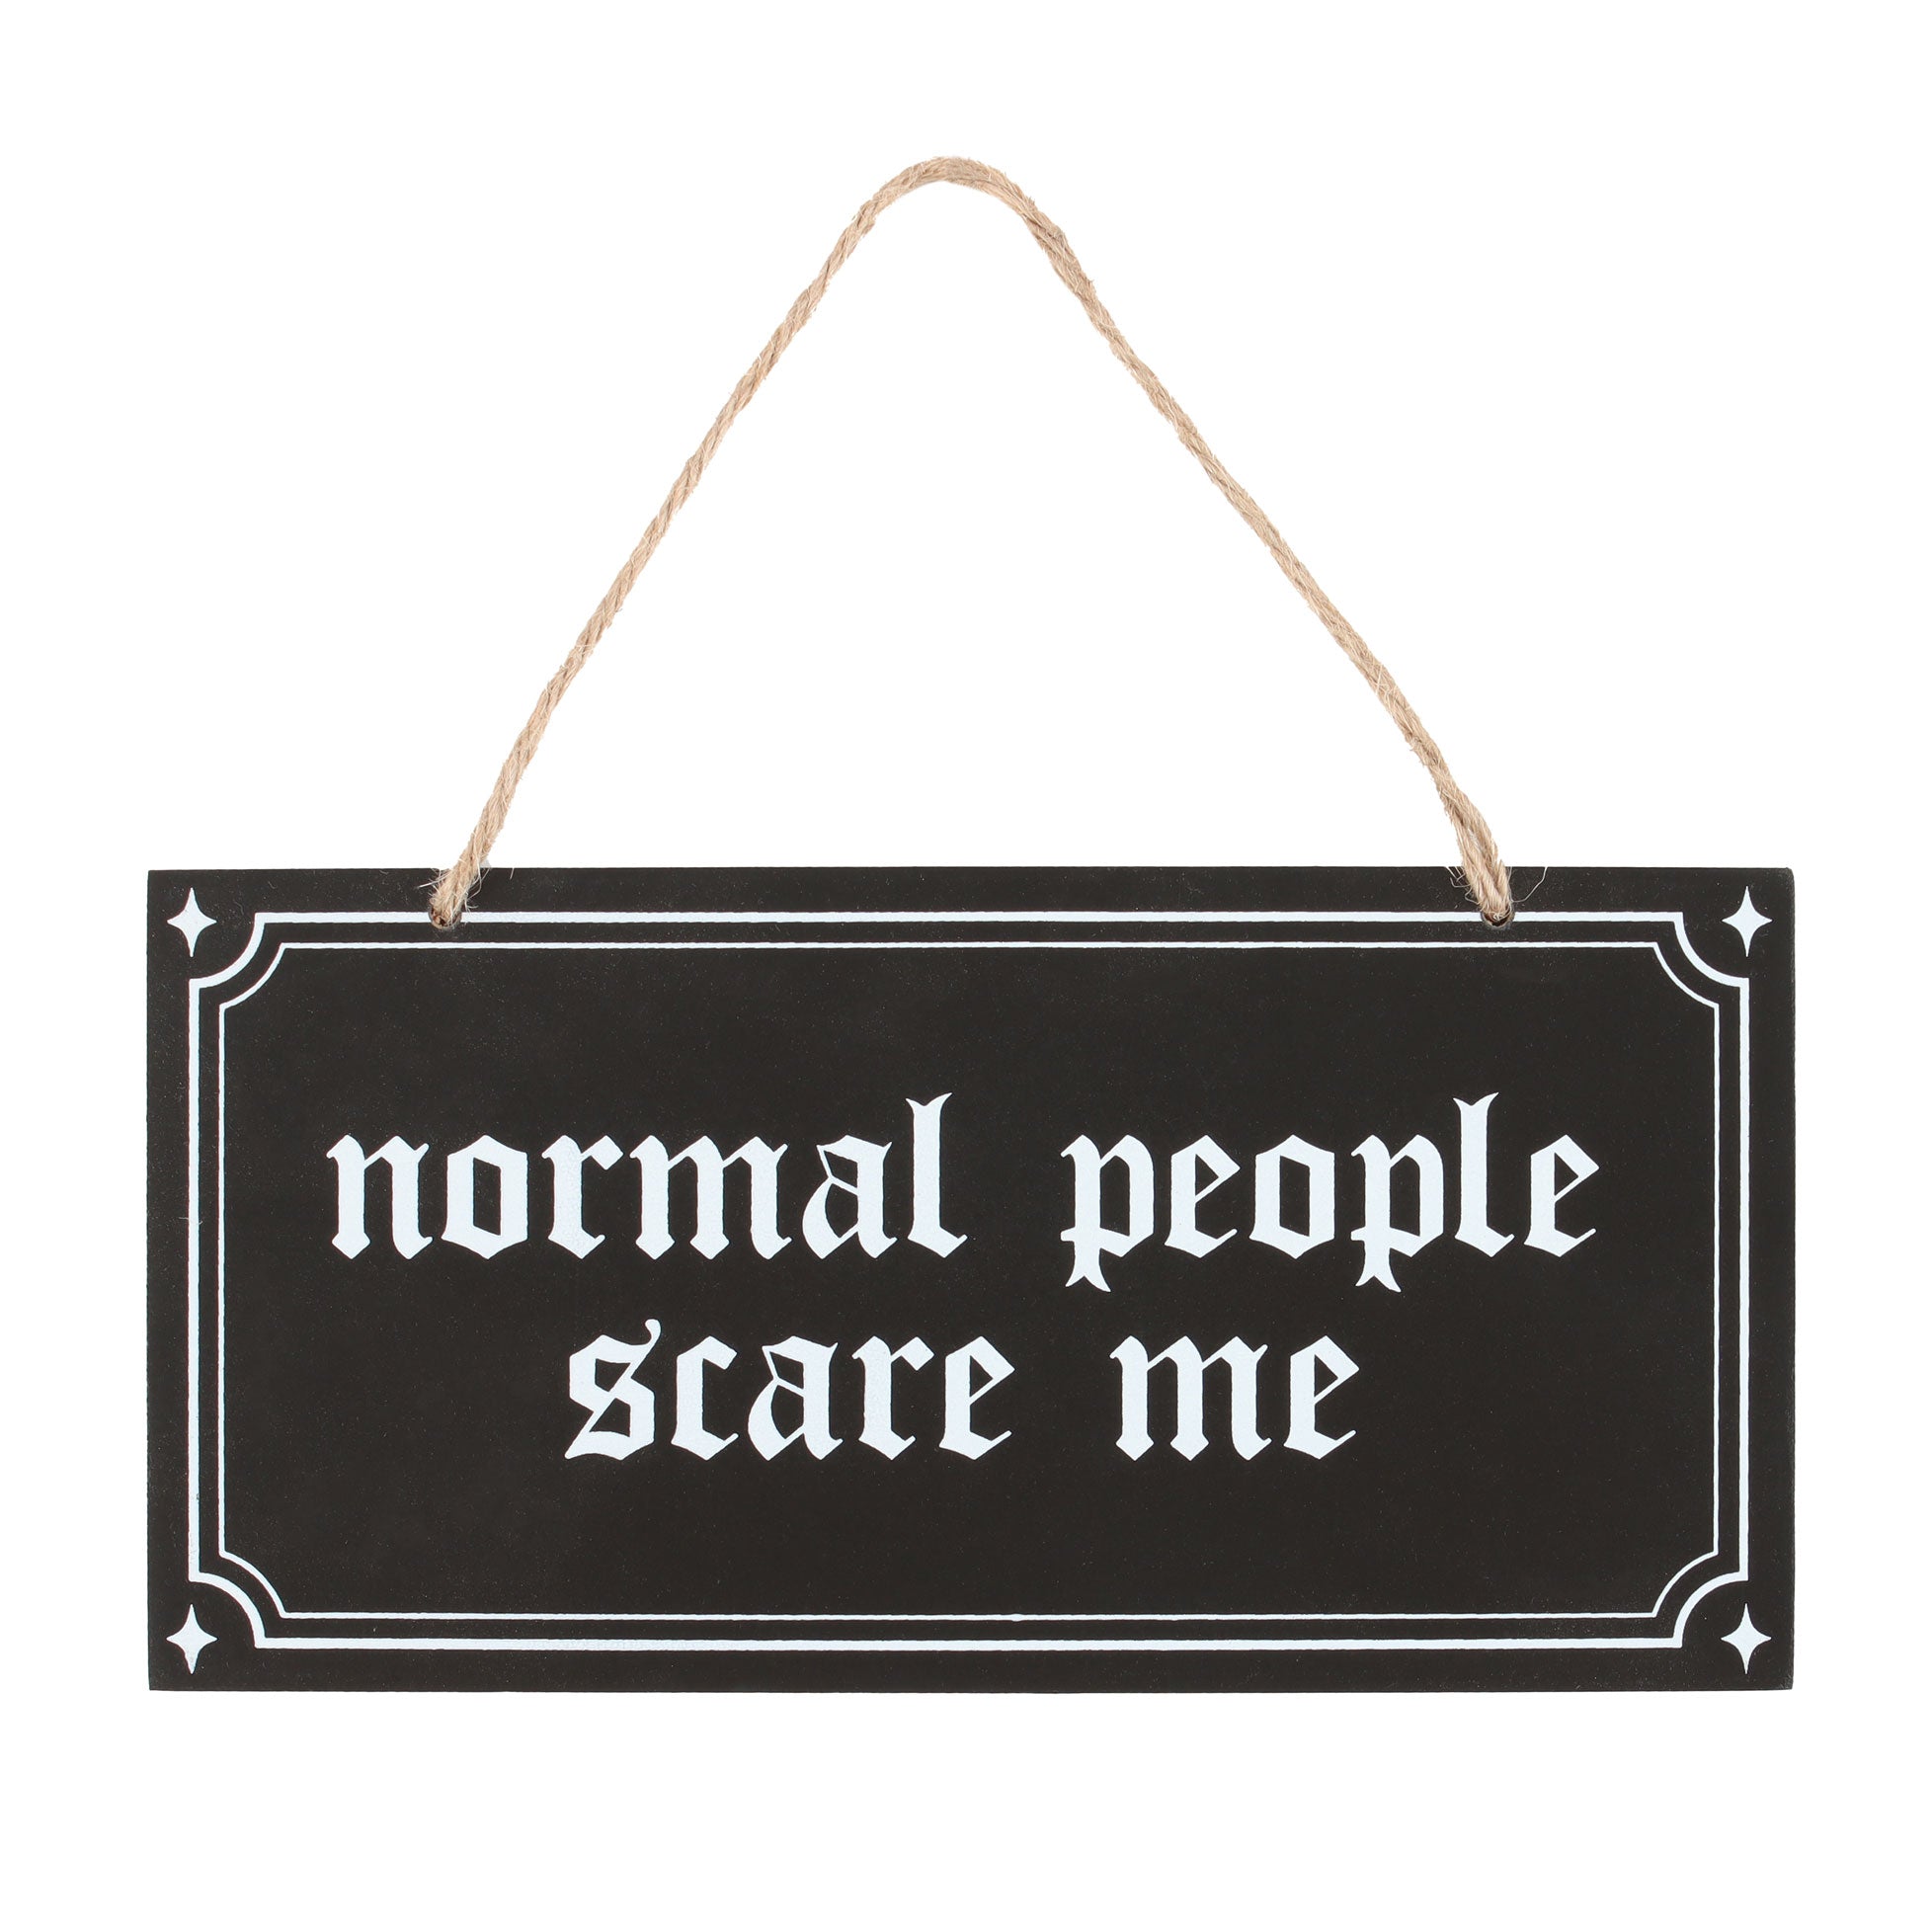 View Normal People Scare Me Hanging Sign information